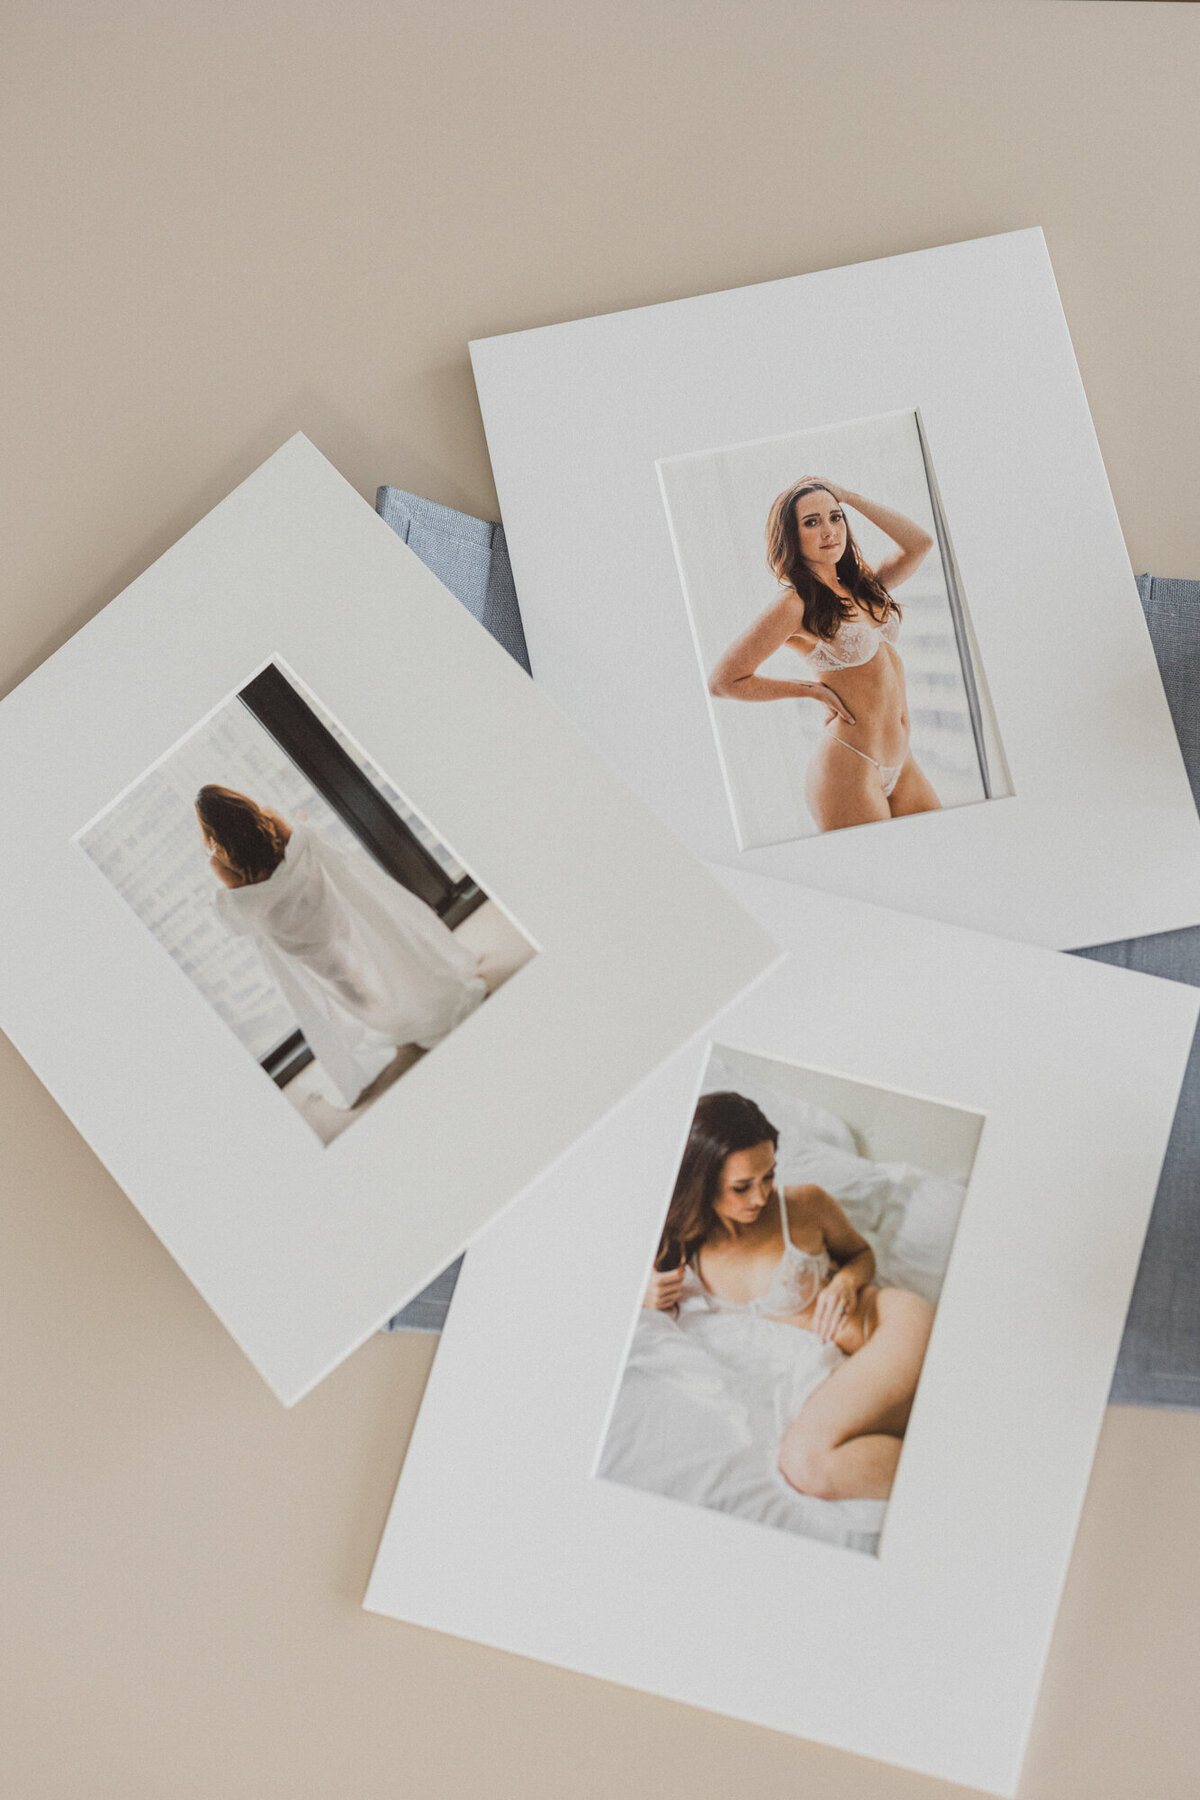 Printed boudoir photos with museum quality mats.